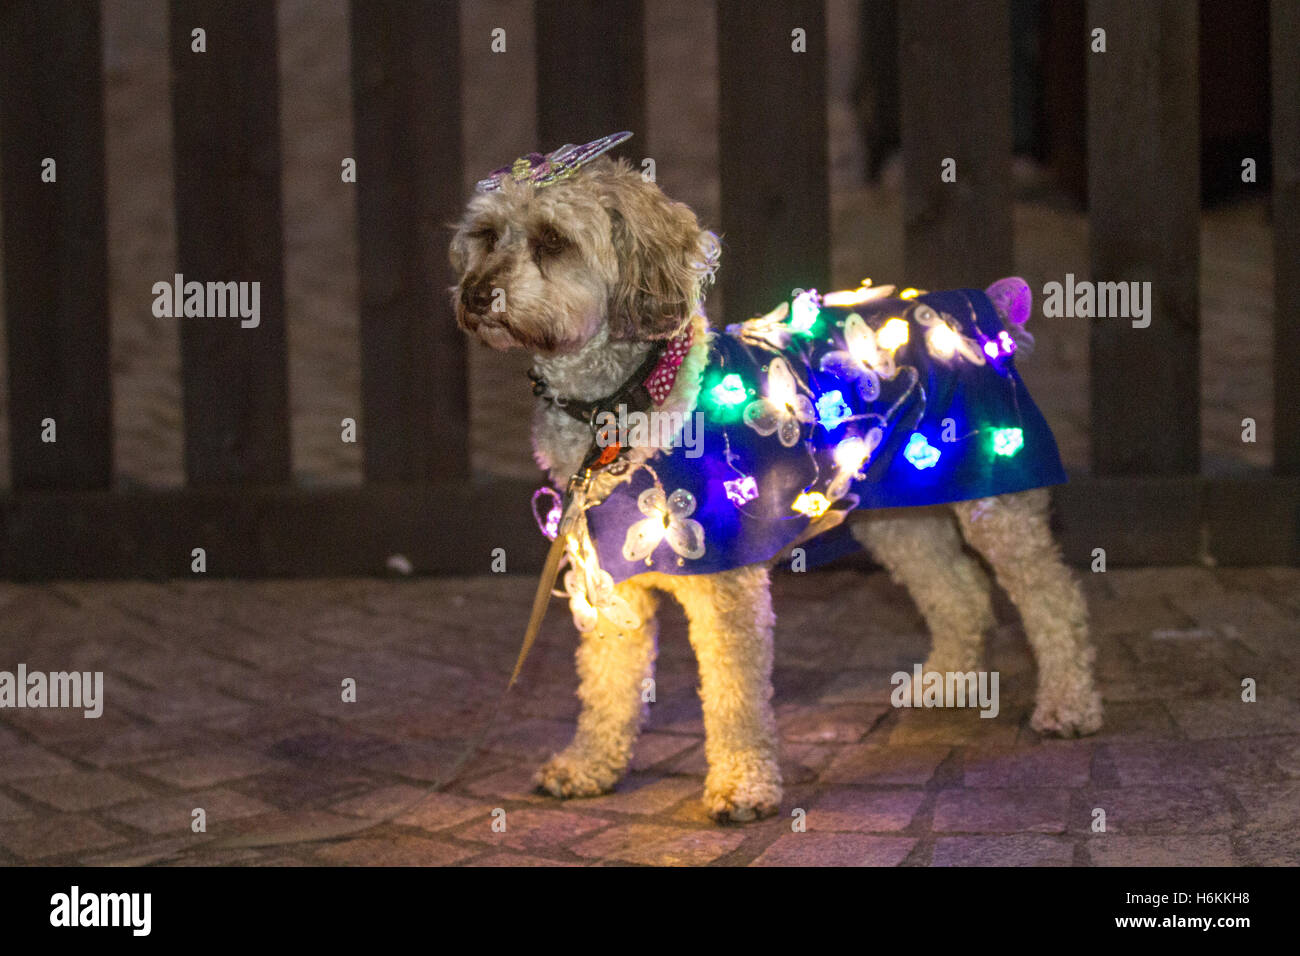 Pet dogs wearing LED lights, illuminated decorated bright lights in Blackpool, Lancashire, UK,  Pampered Pooch at LumiDogs LightPool Festival. LumiDogs was first staged in 2014 and was back by ´pup´ular demand for 2016. Dogs and their owners appeared in costumes, material and lights with dressed up dogs appearing as a unicorn, ballerina, ballroom dancer, cowboy or aeroplane.  Pomeranian, Shih Tzu, Chihuahua, Terriers, and Cockapoos festooned with LED’s as these canine stars lit up St Johns Square. Stock Photo